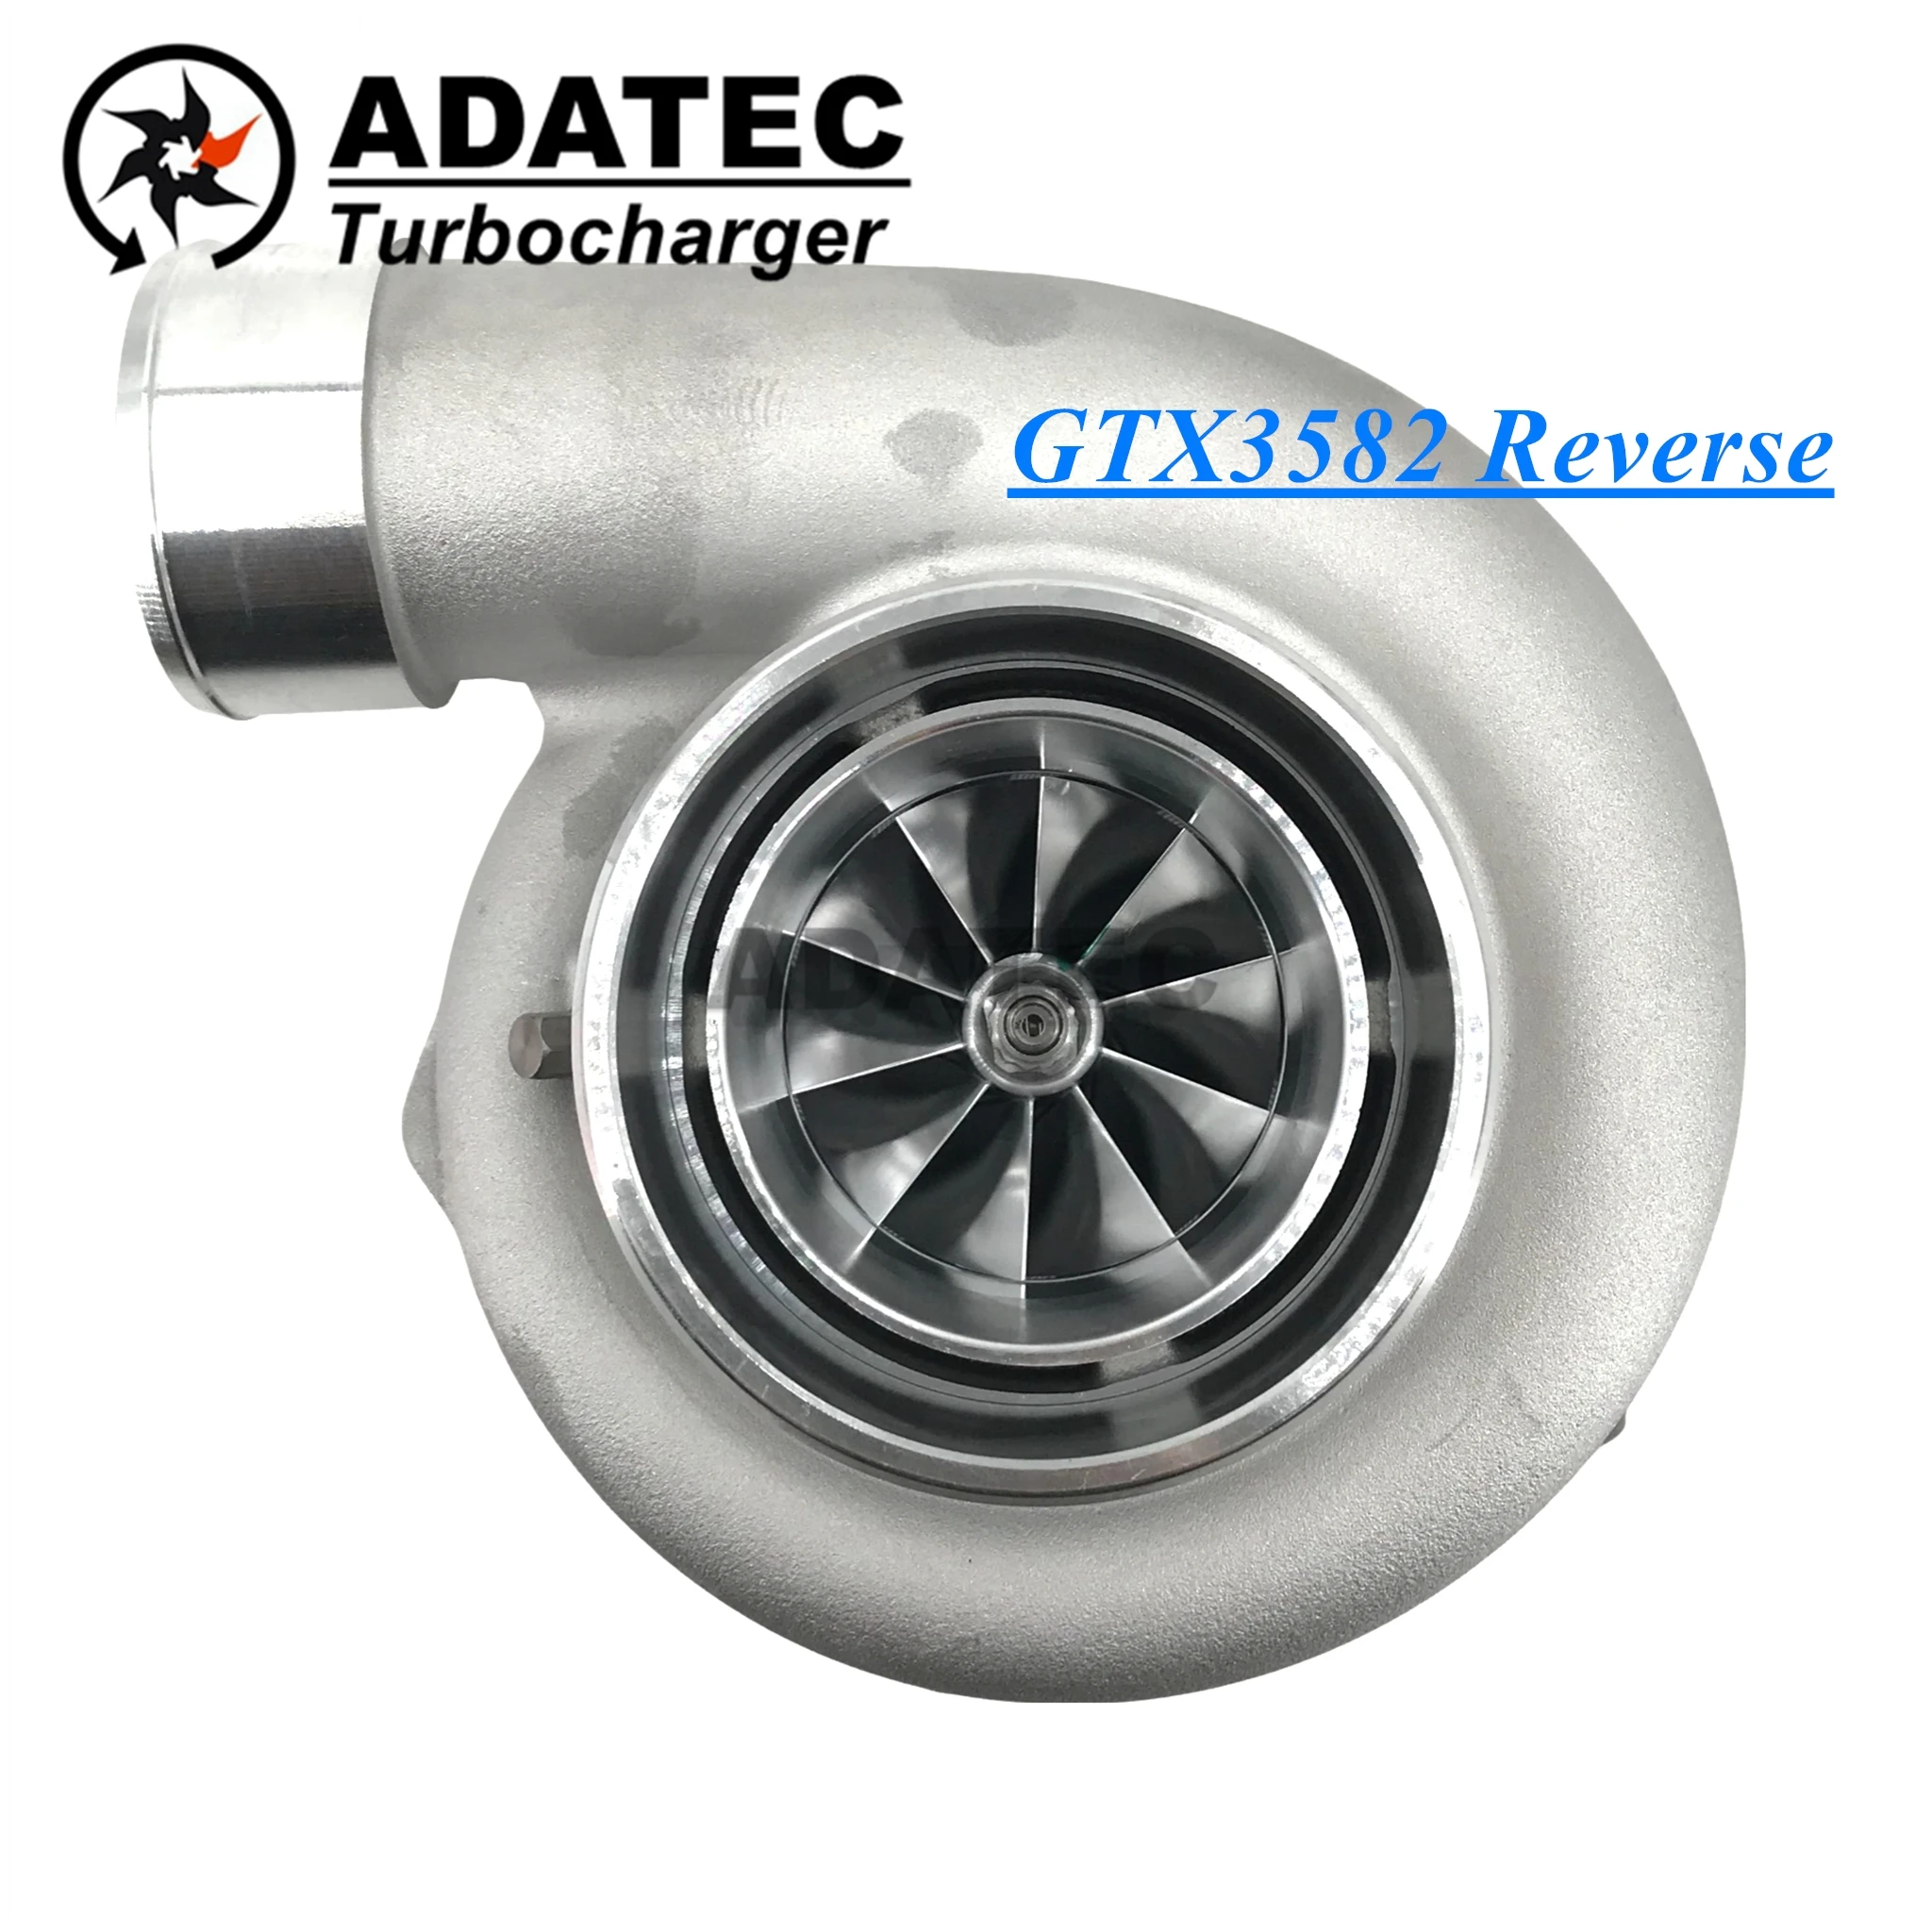 

GTX3582 Reverse Gen2 GEN II 740902-0057 Turbo Charger Performance Turbine For 844626-5004S 0.83 A/R V-Band 450-900 HP 2.0L-4.5L